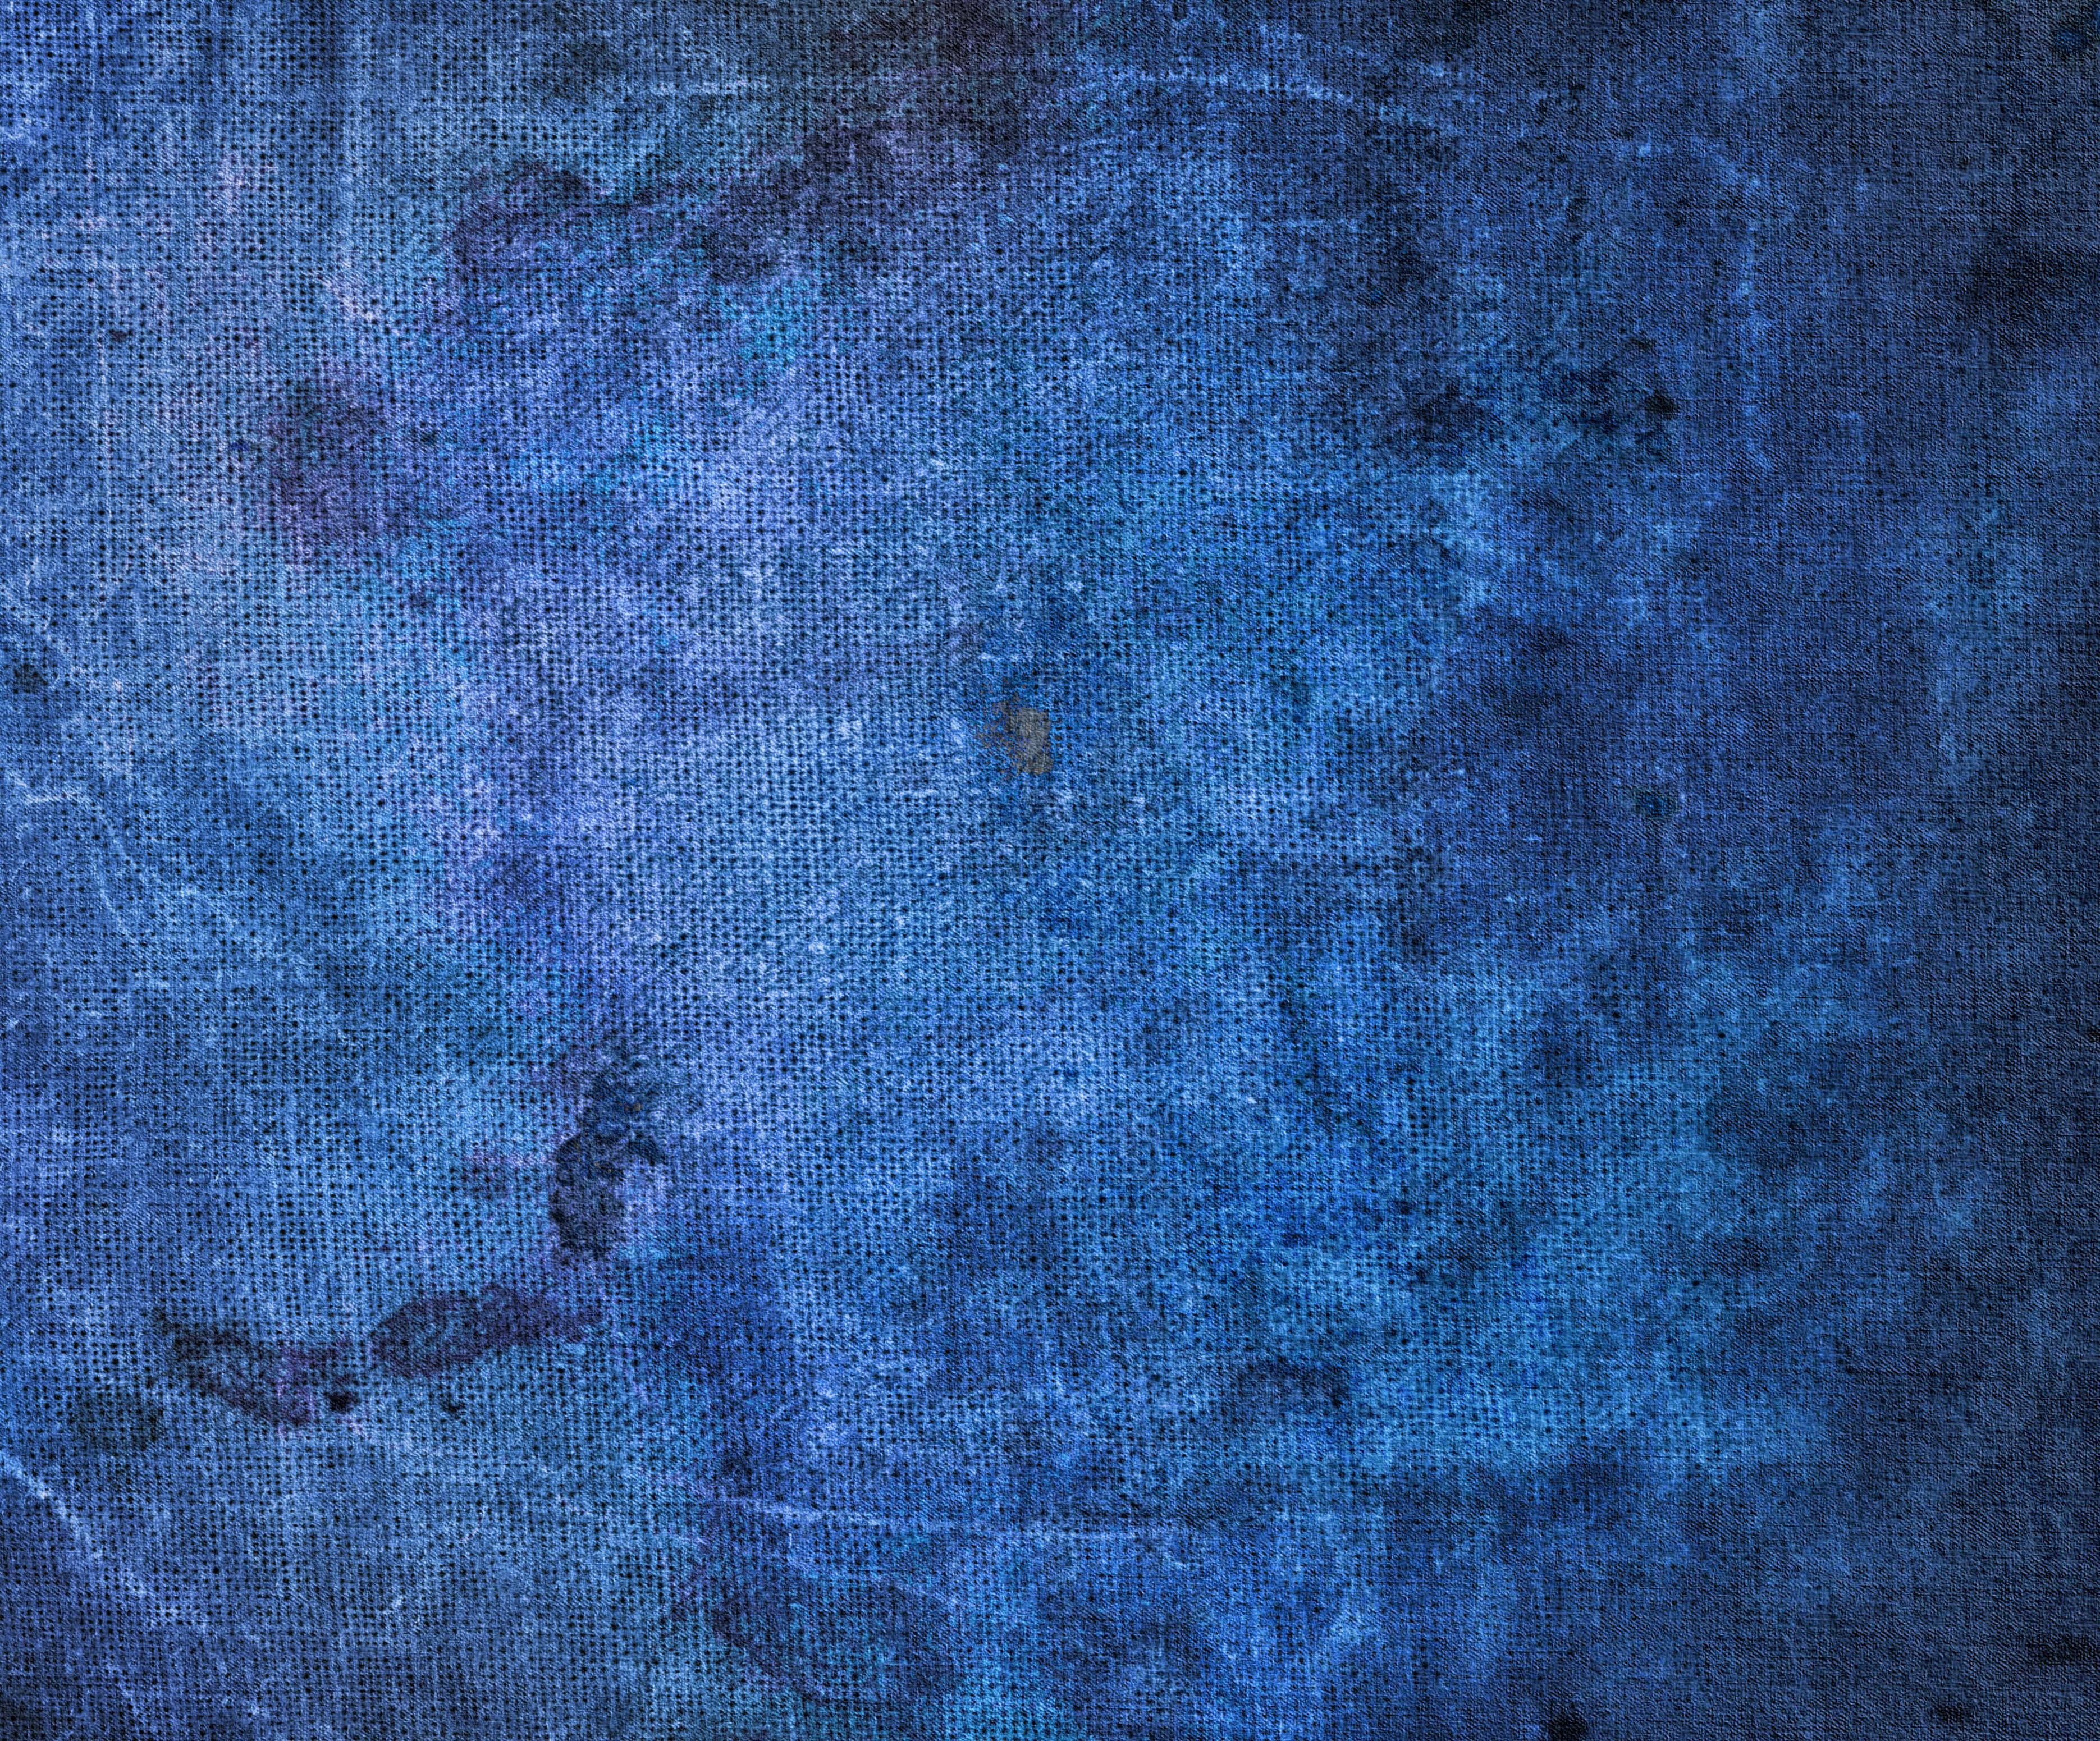 Abstract Grunge Texture On Blue Fabric